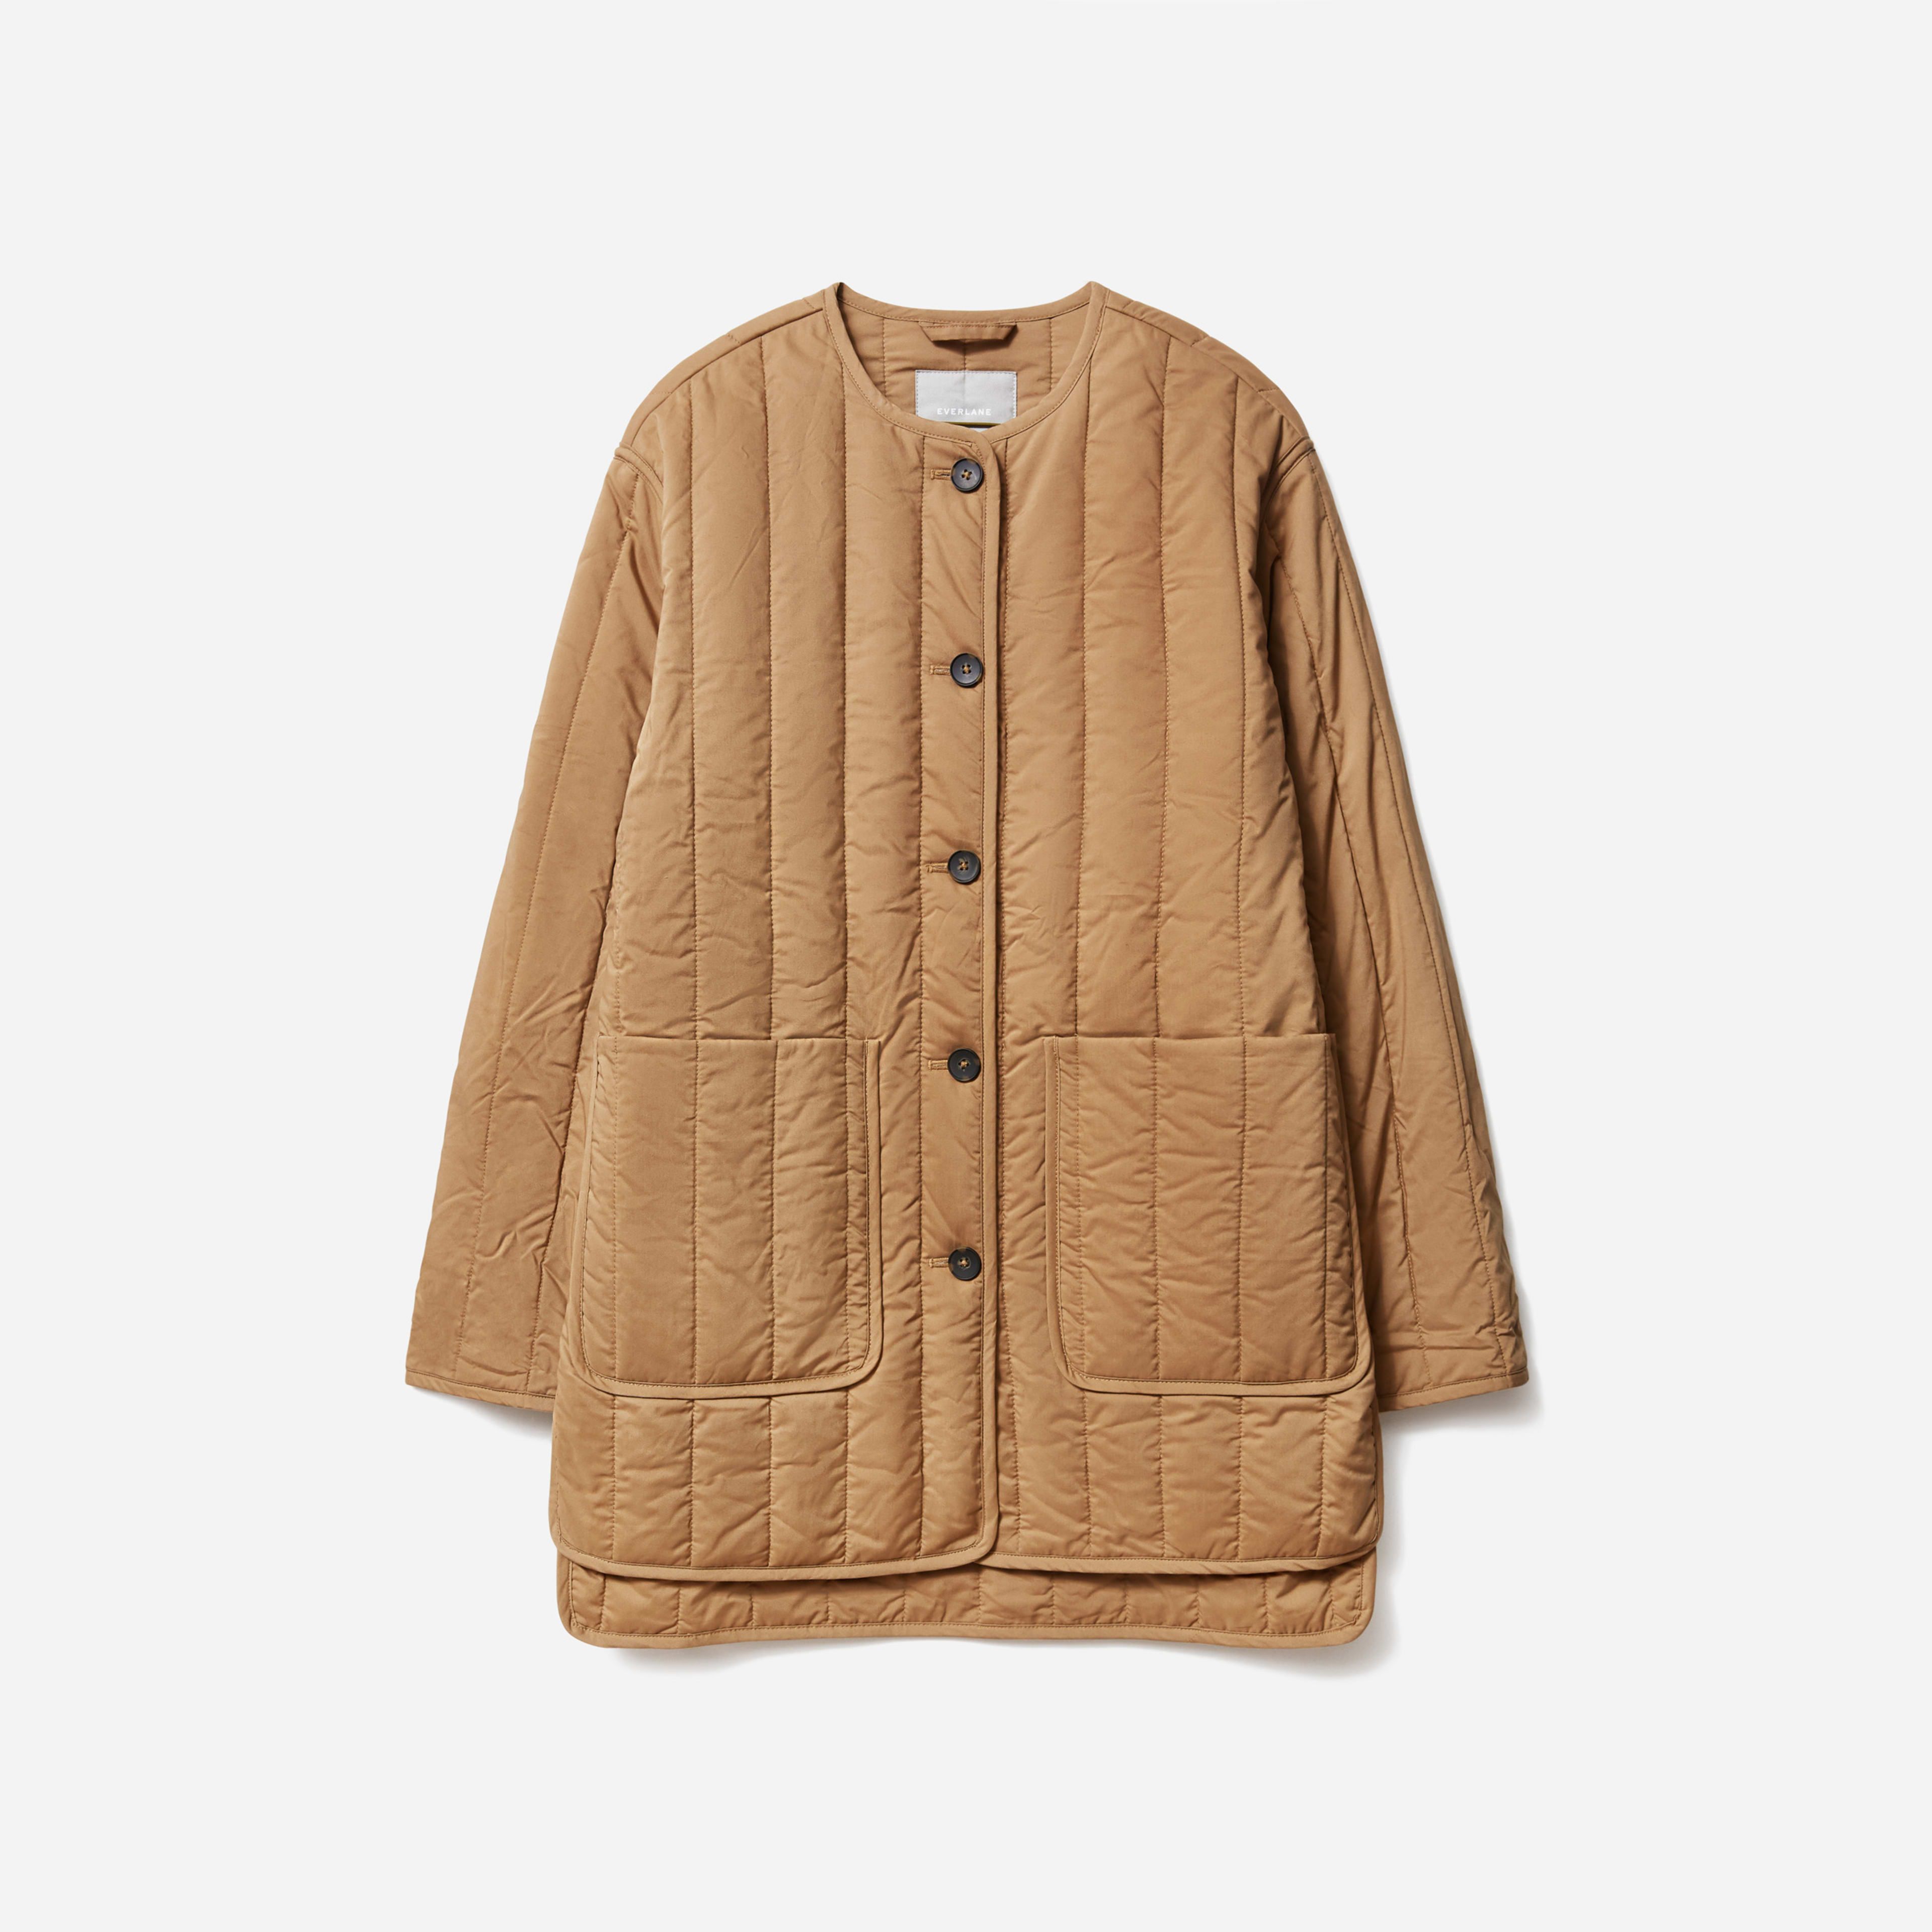 The Cotton Quilted Jacket, Everlane, Quilted Jacket for Women, Fall Jacket, Womens Fall Jacket | Everlane